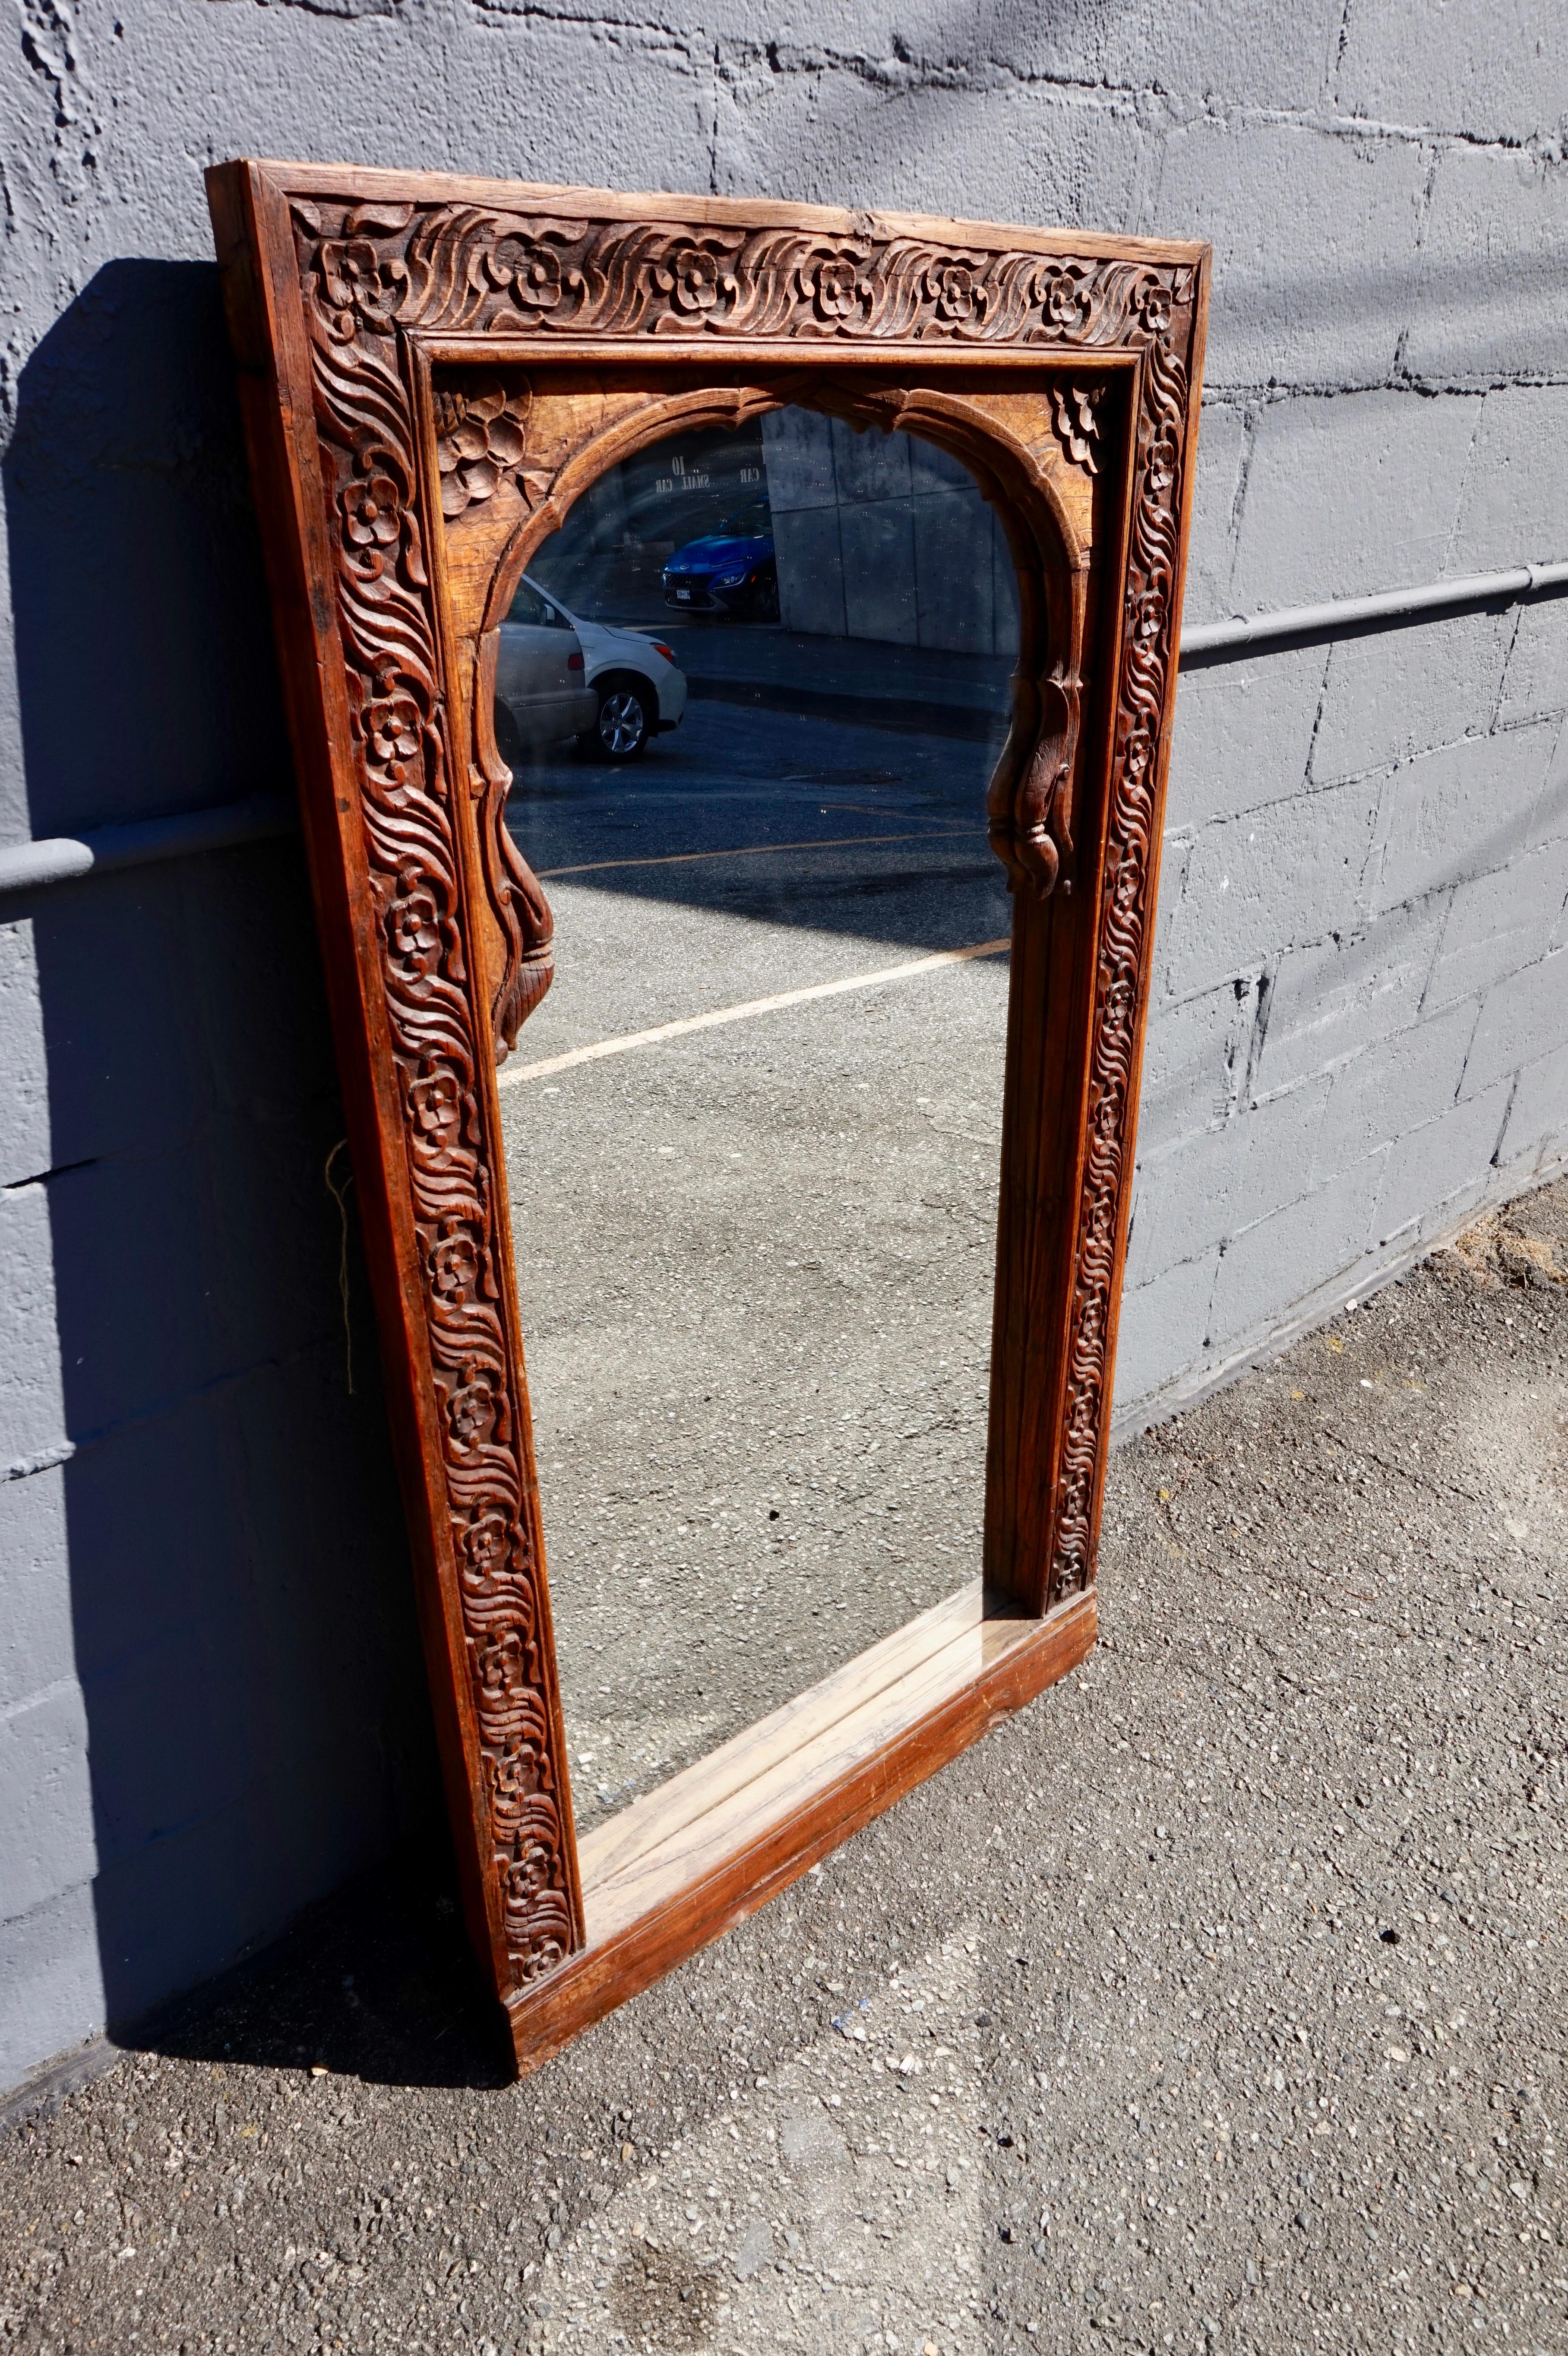 Circa 1880's

Indian arched window converted into a mirror. Solid teak frame laced with floral motif carvings. Hard backed and wired for hanging or can be used as a wall mirror. Good original patina.